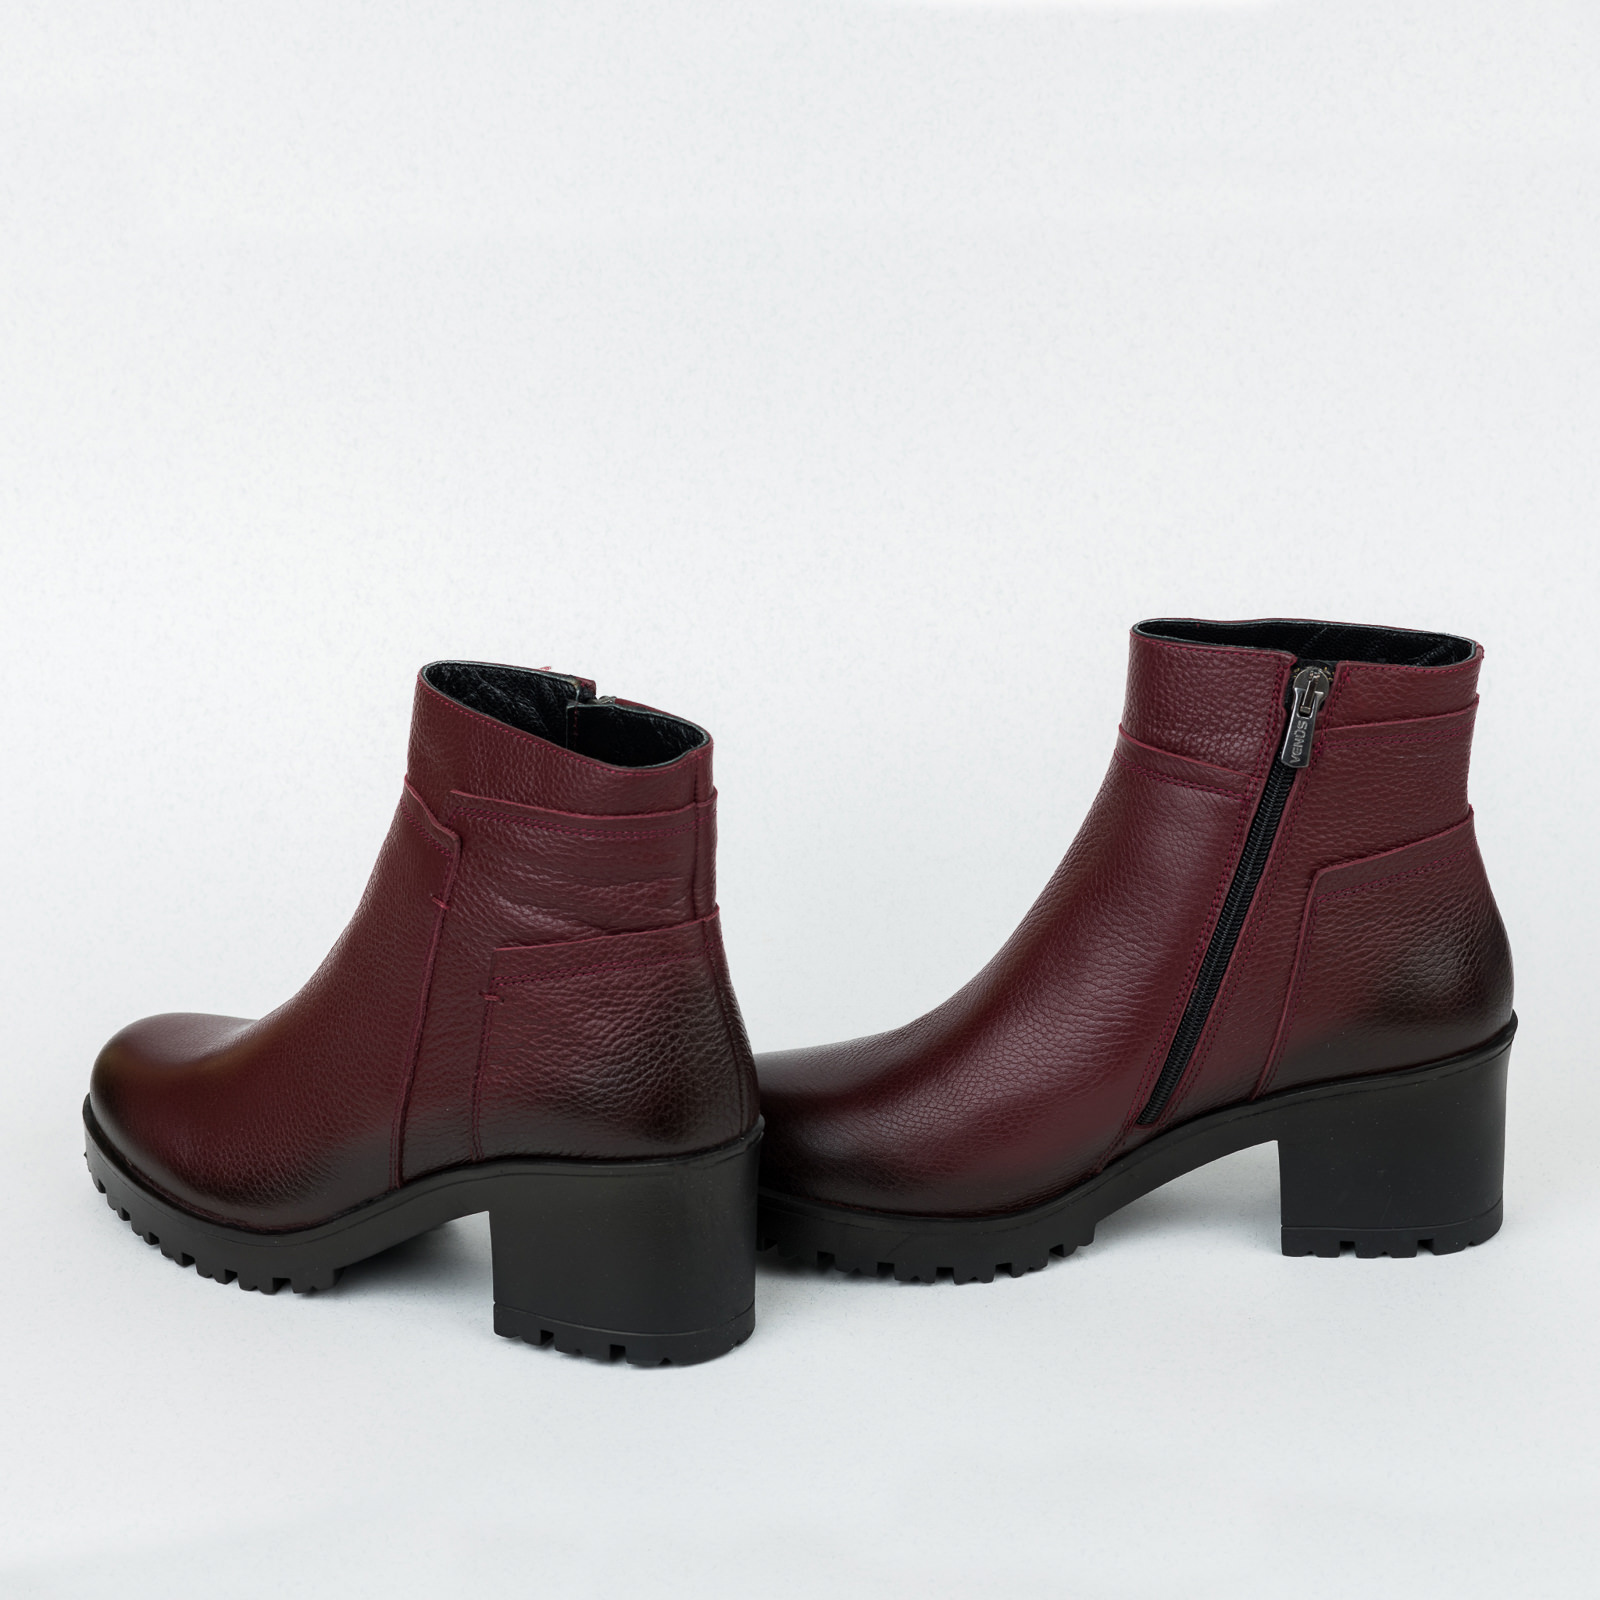 Leather ankle boots B439 - WINE RED